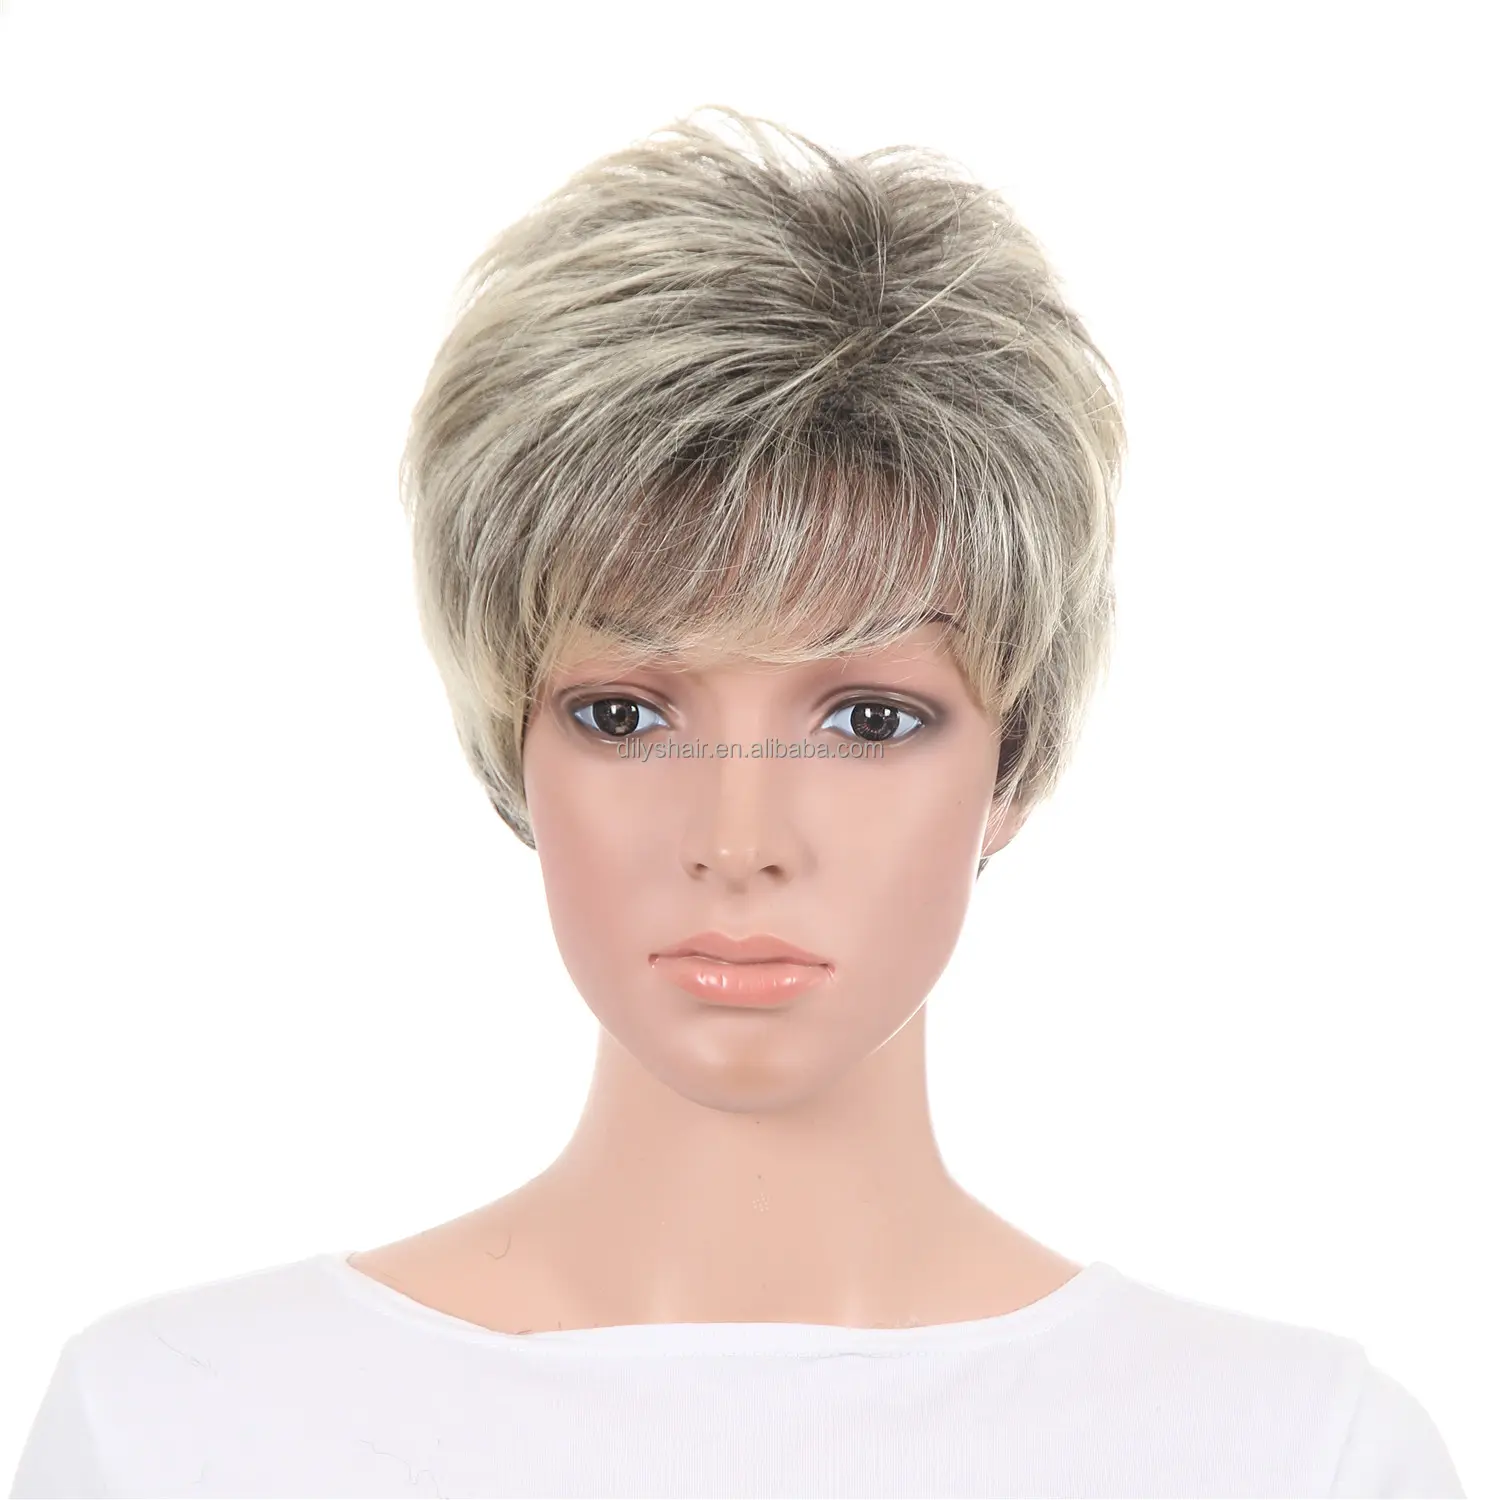 Short Hair Wig 613# Blonde Synthetic Short Straight Haircut For White Women